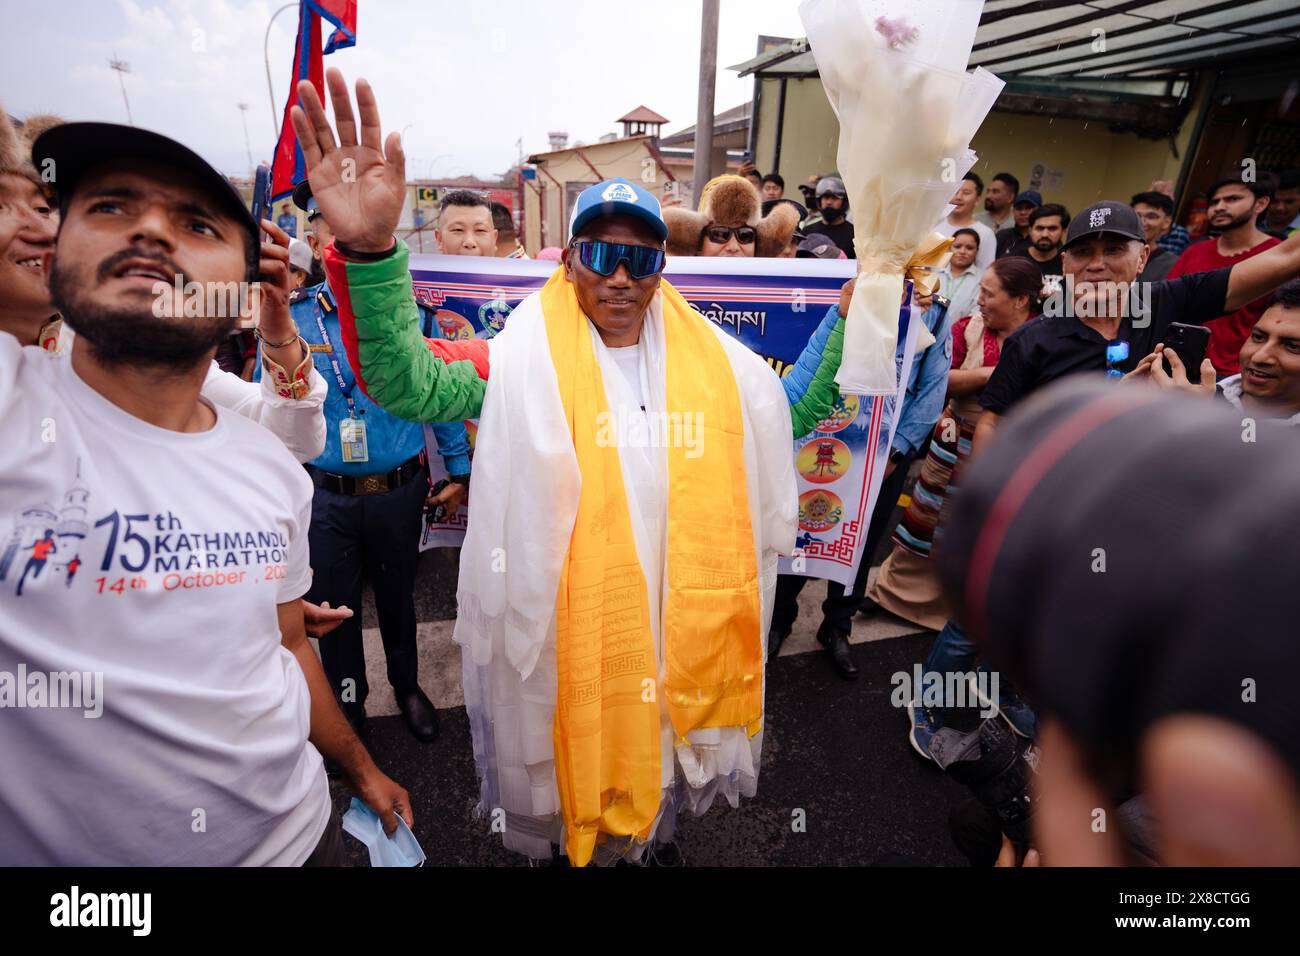 Kathmandu, Nepal. 24th May, 2024. Legendary Mountaineer Kami Rita Sherpa waves at people as he arrives after scaling Mt Everest for the 30th time, leading the world record of most ascents on the world's highest peak Mount Everest at Tribhuvan International Airport. Kami Rita Sherpa, considered one of the greatest mountain guides, reached the 8,849-meter (29,032-foot) summit at 7:49 AM local time on Wednesday 22 May, 2024 according to expedition organizer Seven Summits Treks. (Photo by Prabin Ranabhat/SOPA Images/Sipa USA) Credit: Sipa USA/Alamy Live News Stock Photo